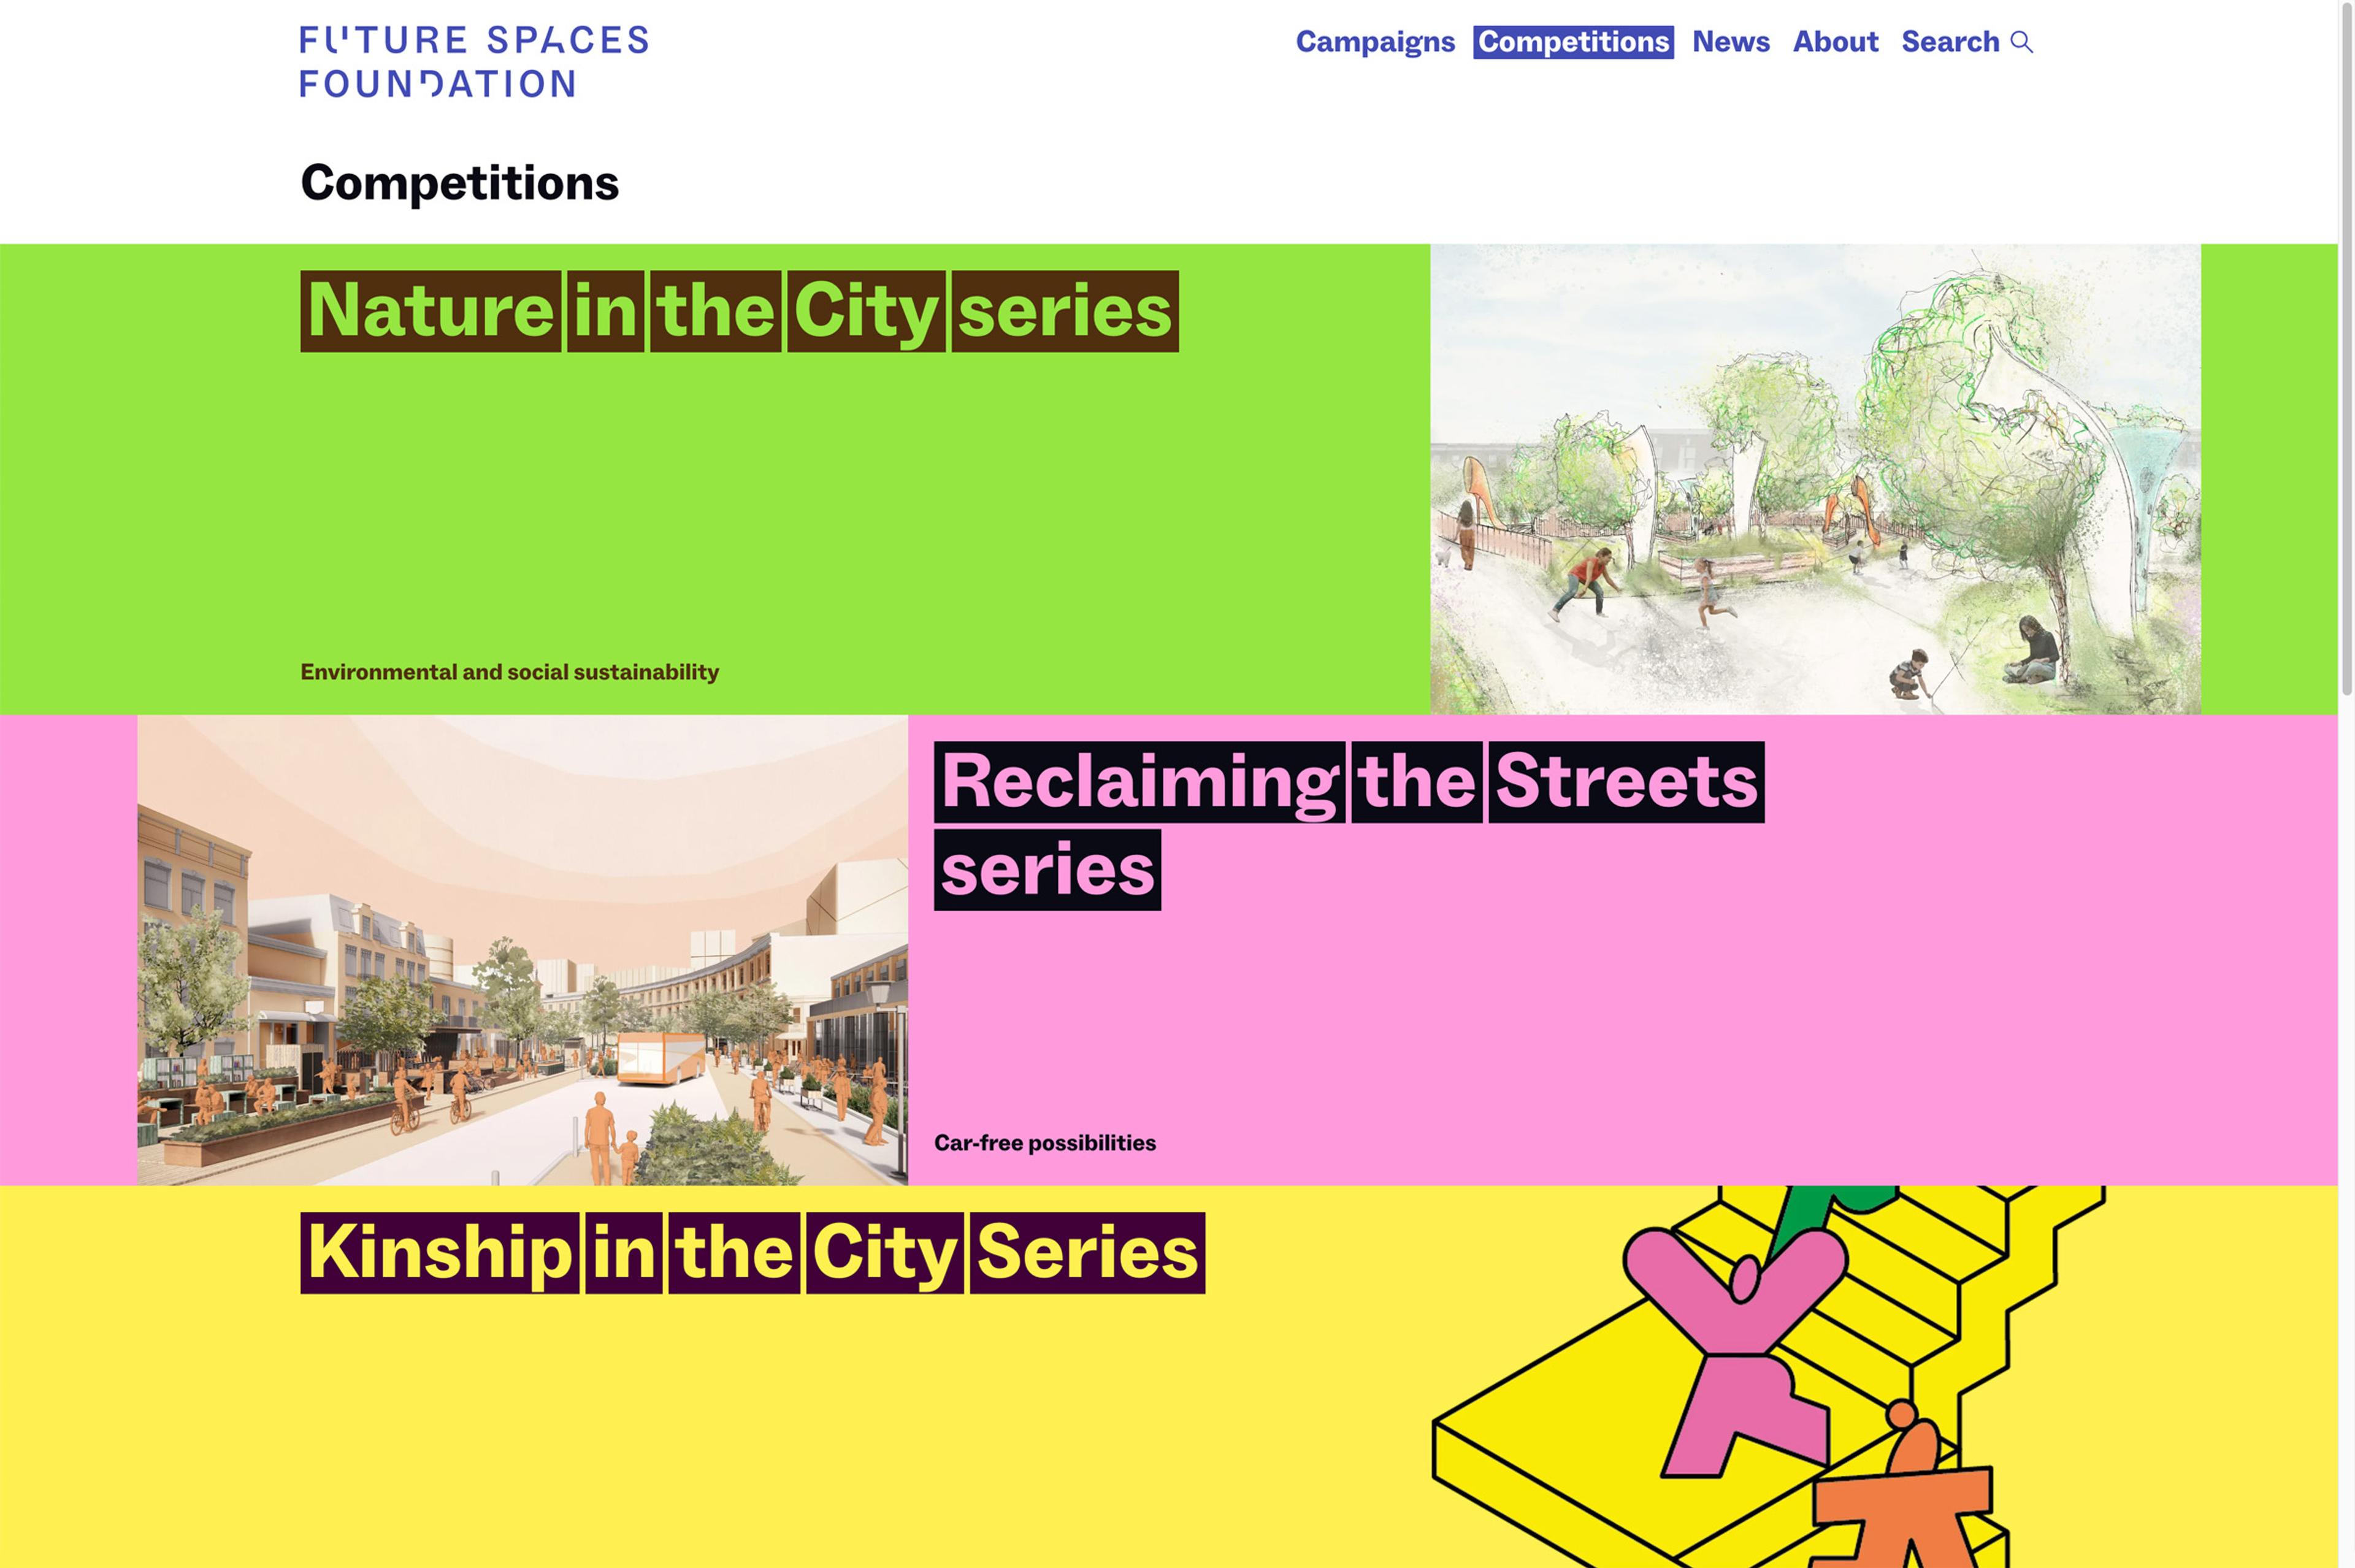 A screengrab of the Future Spaces Foundation website competitions page